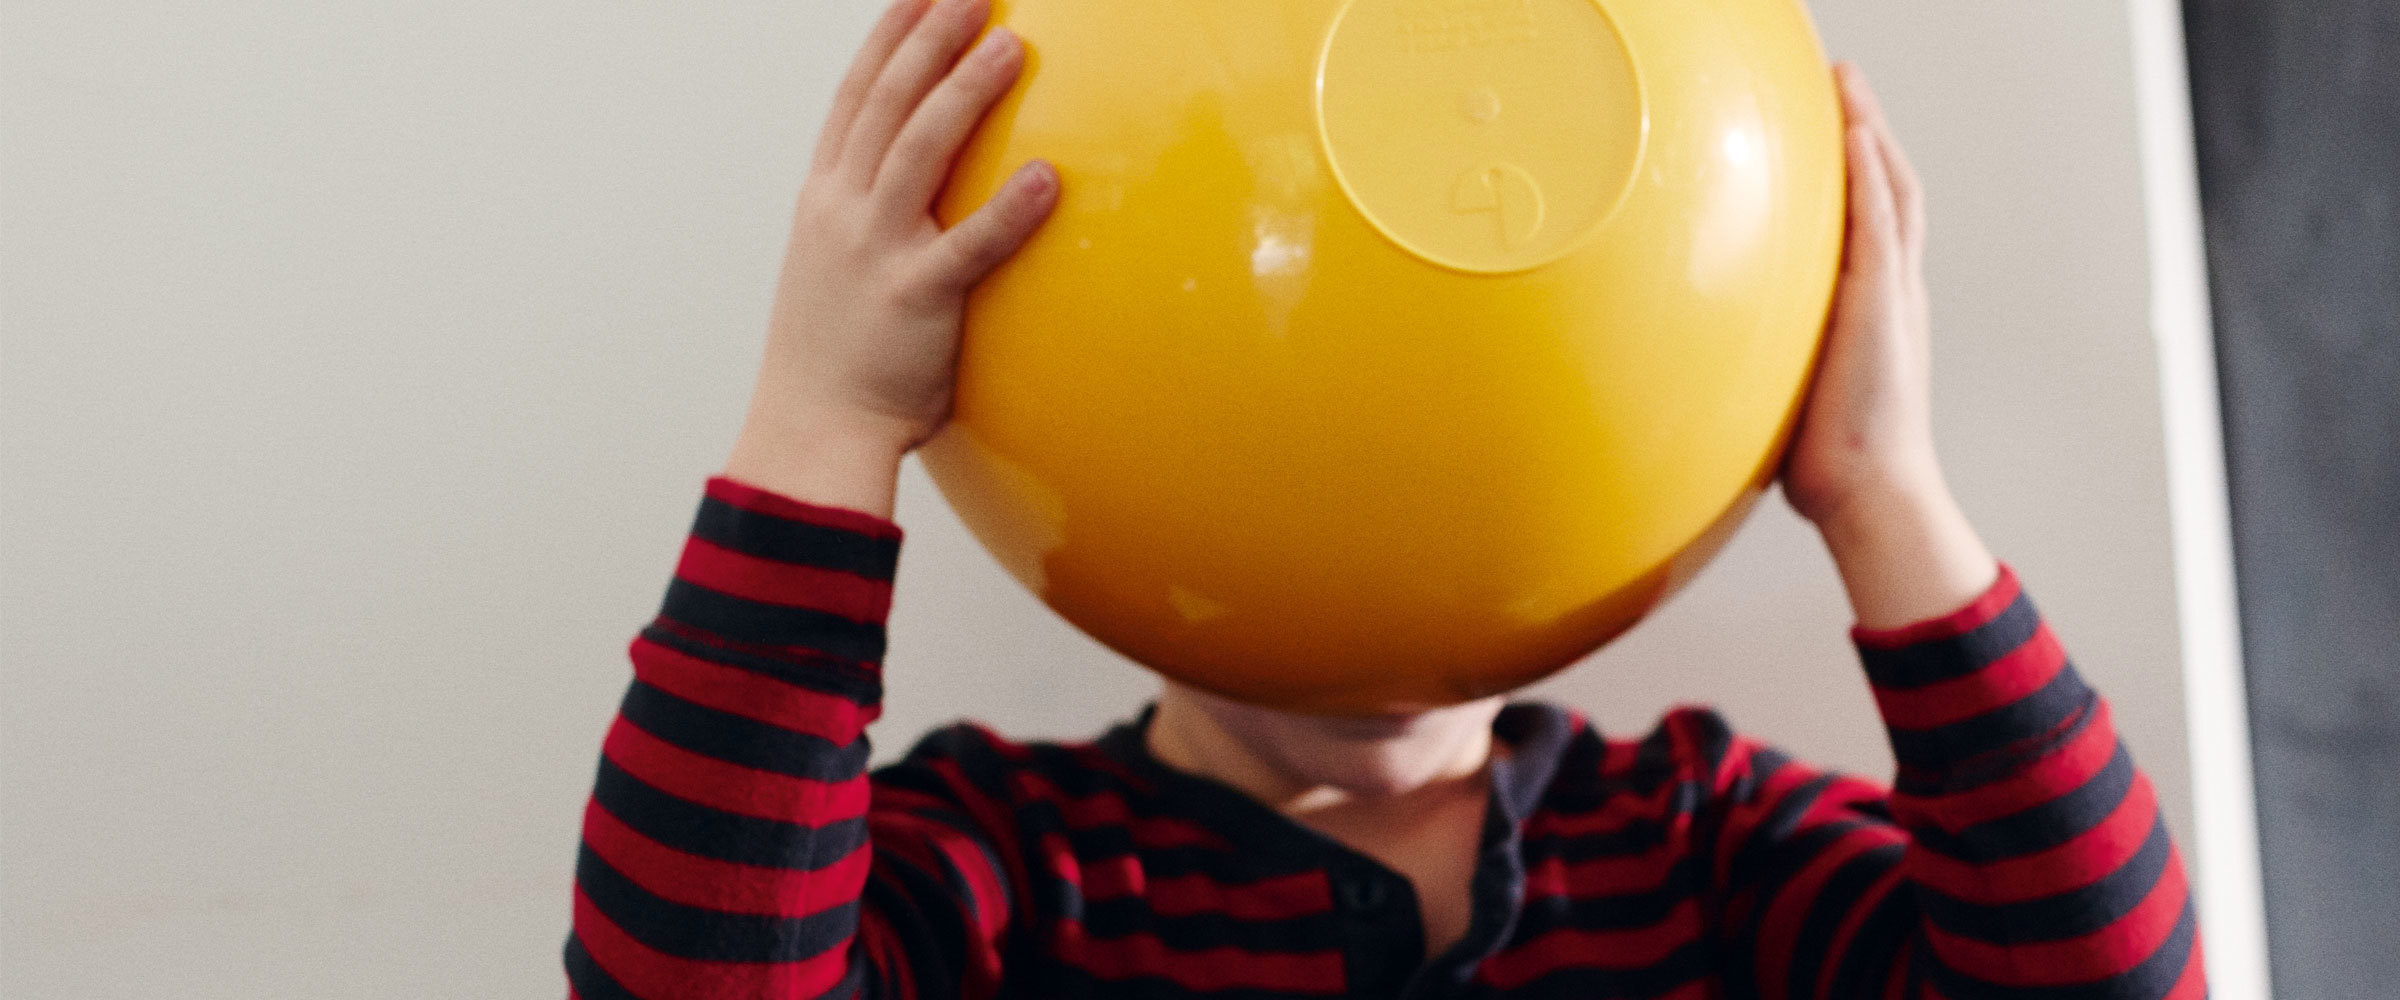 A child holding a bowl over their face